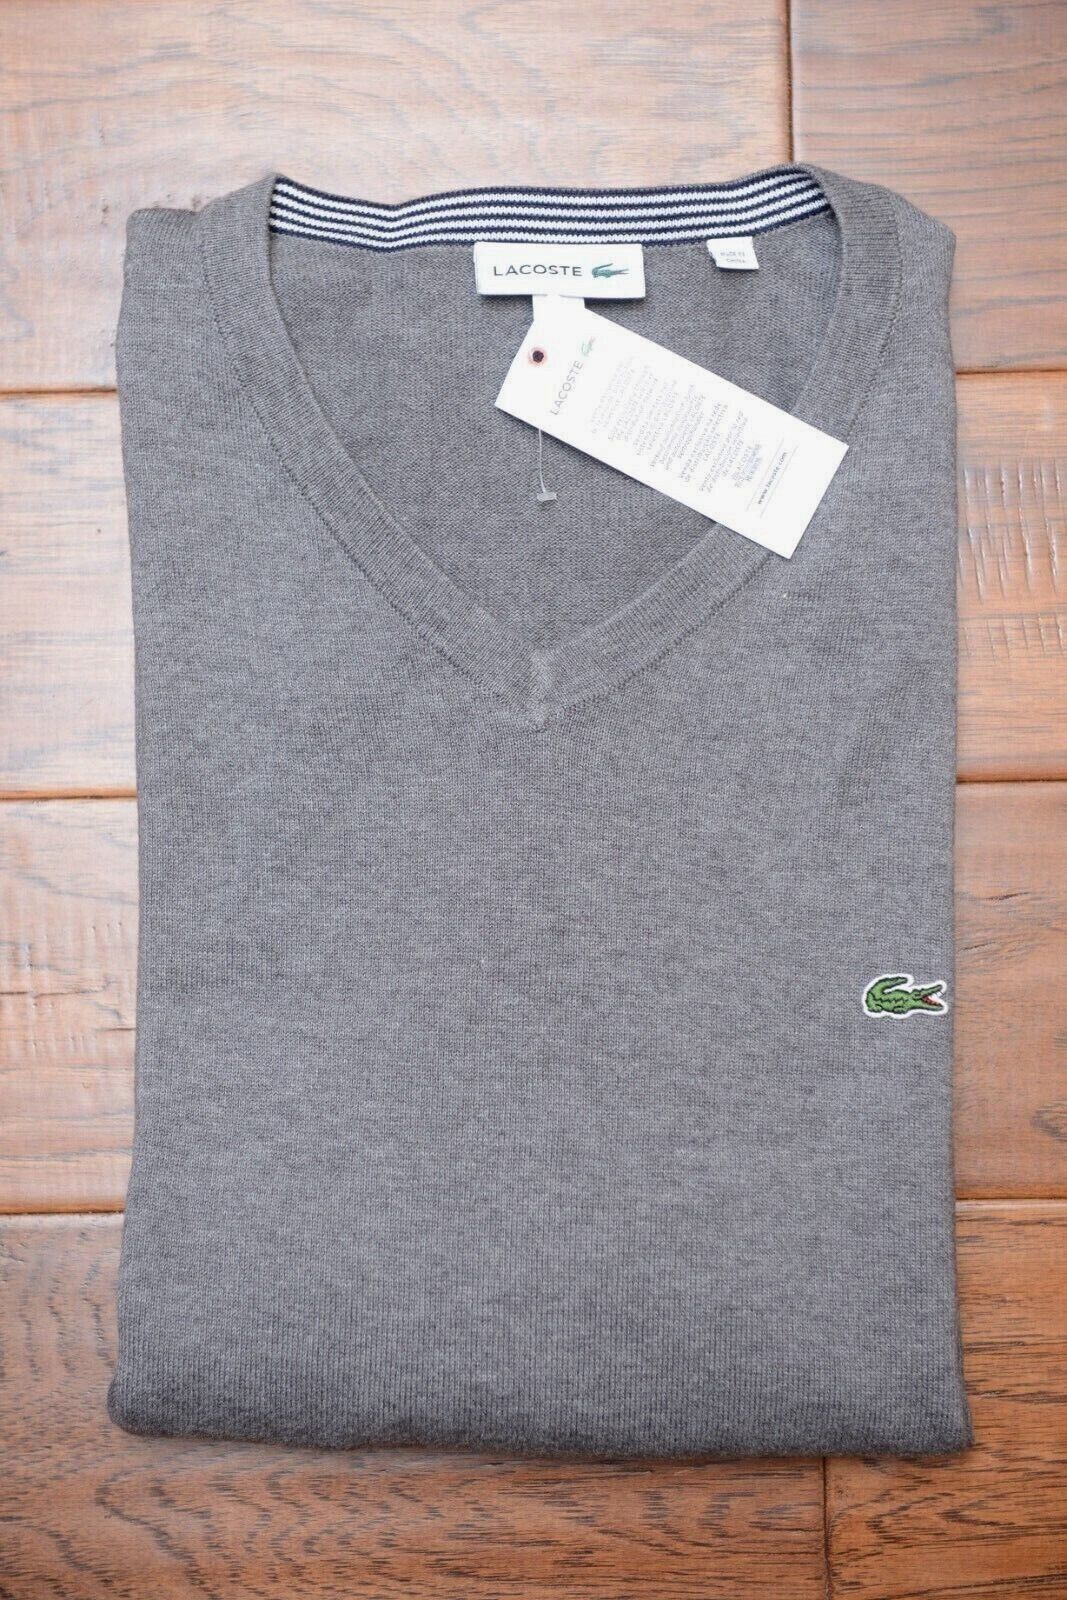 Primary image for Lacoste AH7003 Men's V Neck Med Gray Tight-Knit Cotton Sweater 3XL EU 8